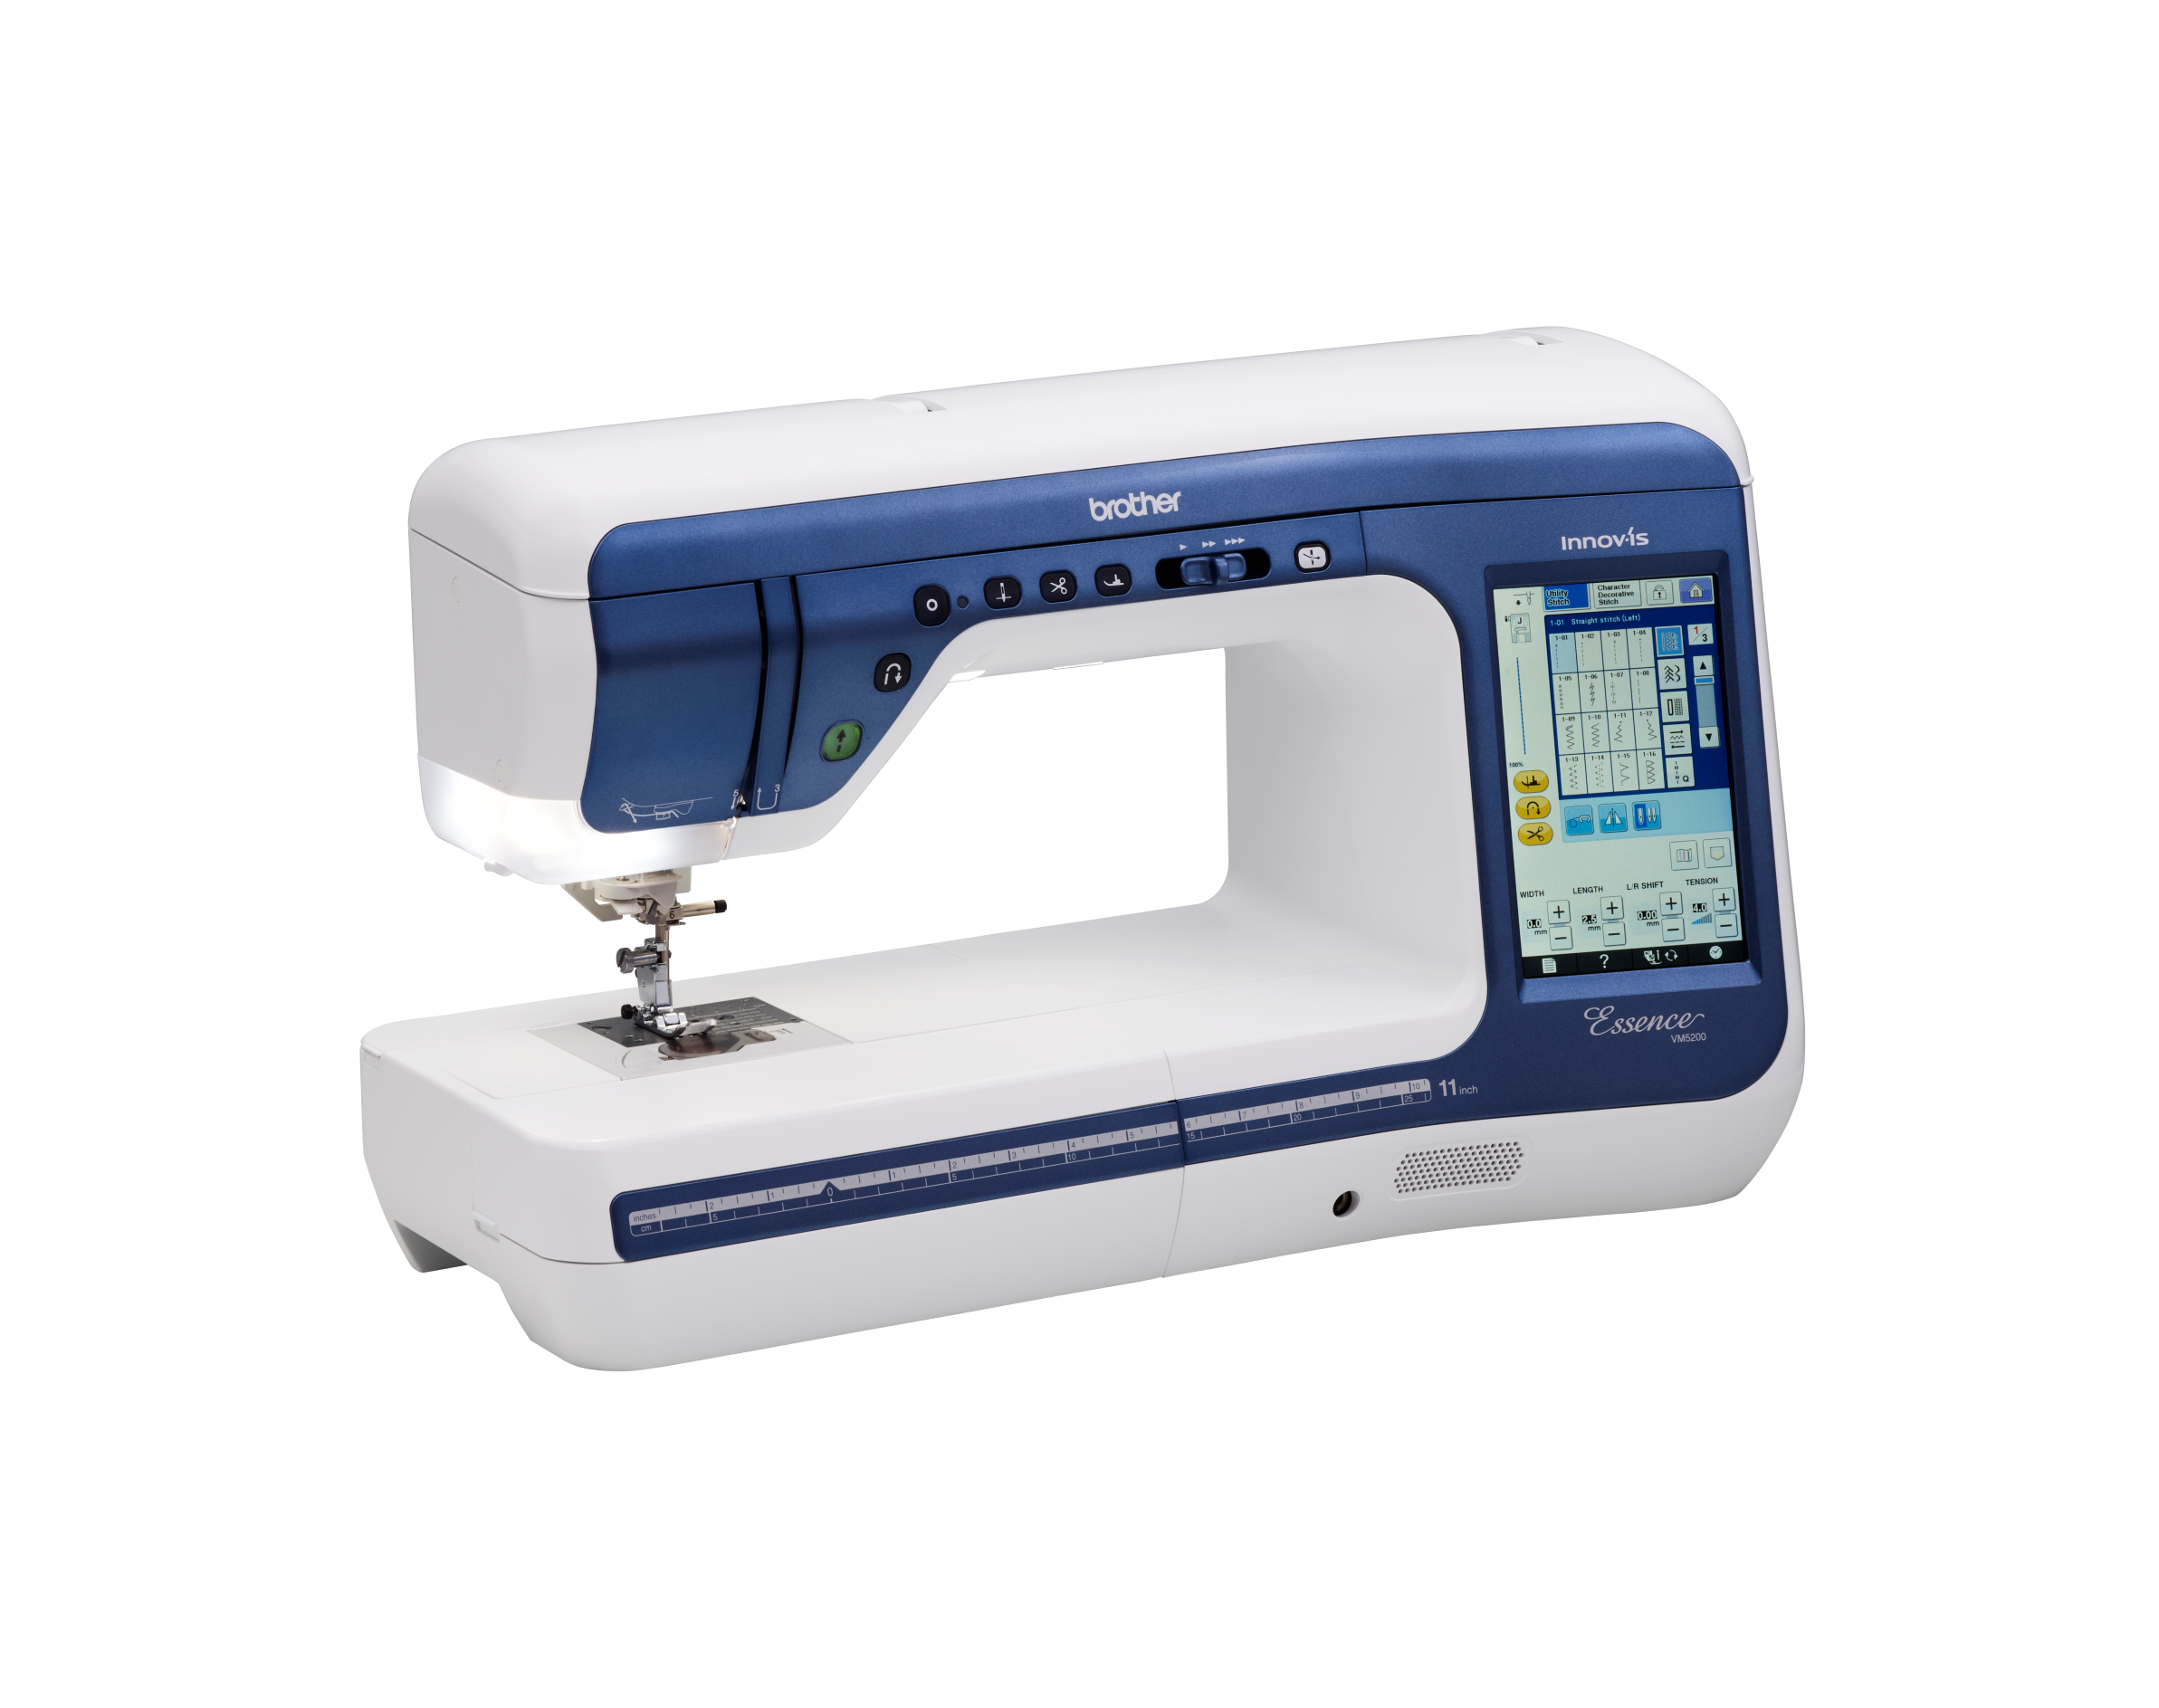 Brother Essence Innov-is VM5200 Sewing and Embroidery Machine 12x8 for Sale at World Weidner